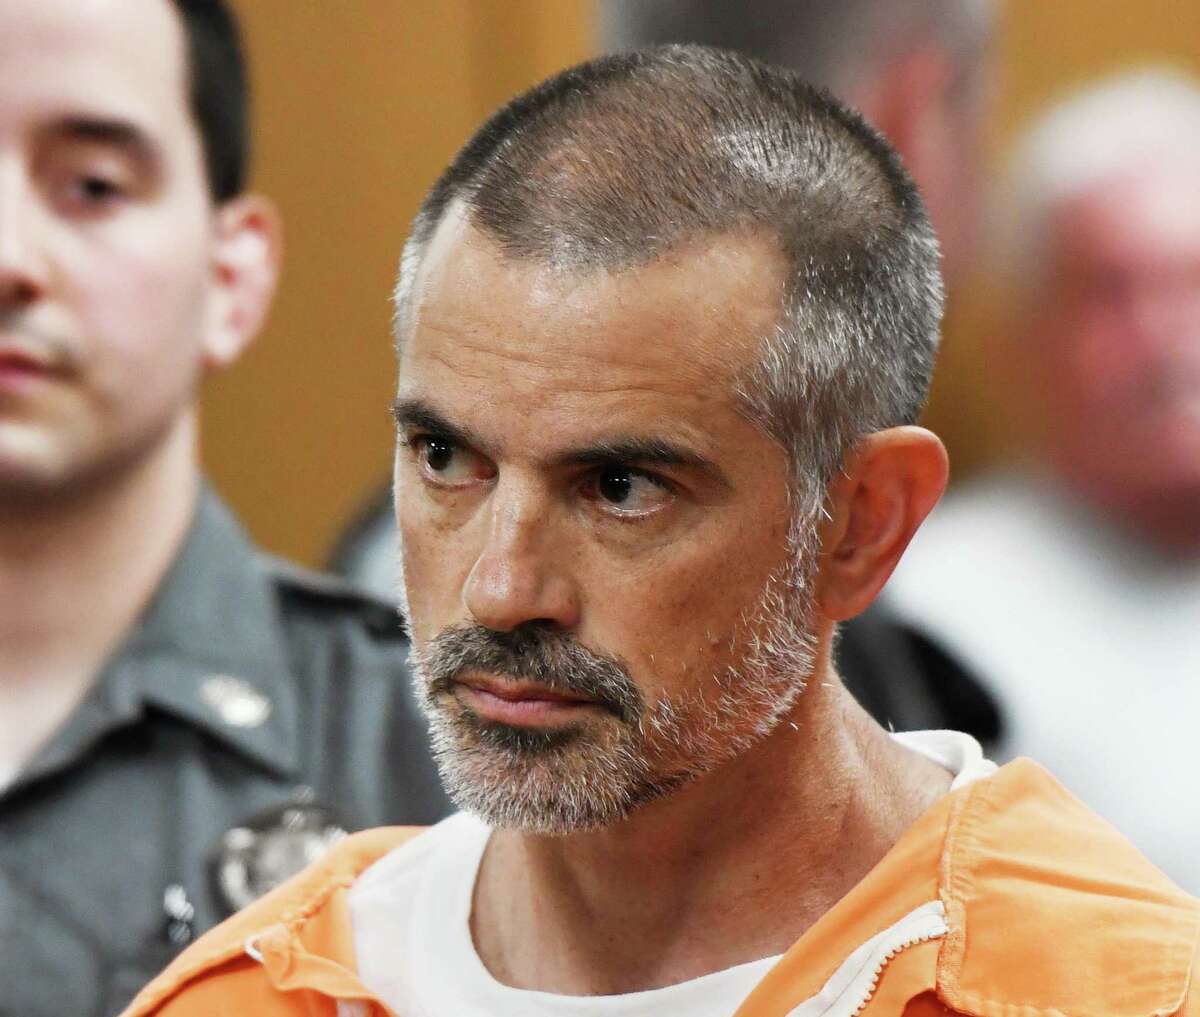 Fotis Dulos, 51, is arraigned on charges of tampering with or fabricating physical evidence and first-degree hindering prosecution at Norwalk Superior Court in Norwalk, Conn. Monday, June 3, 2019. Did Fotis try to frame his employee? In the days before the disappearance, Fotis Dulos shaved his head, possibly in an attempt to look more like his employee, Pawel Gumienny, who had closely cropped hair, Kimball said. The new look surprised Gumienny, who told investigators he even made a comment about it to Fotis Dulos when he first saw him with the shaved head, Kimball said. According to his arrest warrant, Fotis Dulos used Gumienny’s red Toyota Tacoma to drive to New Canaan the morning of the disappearance.